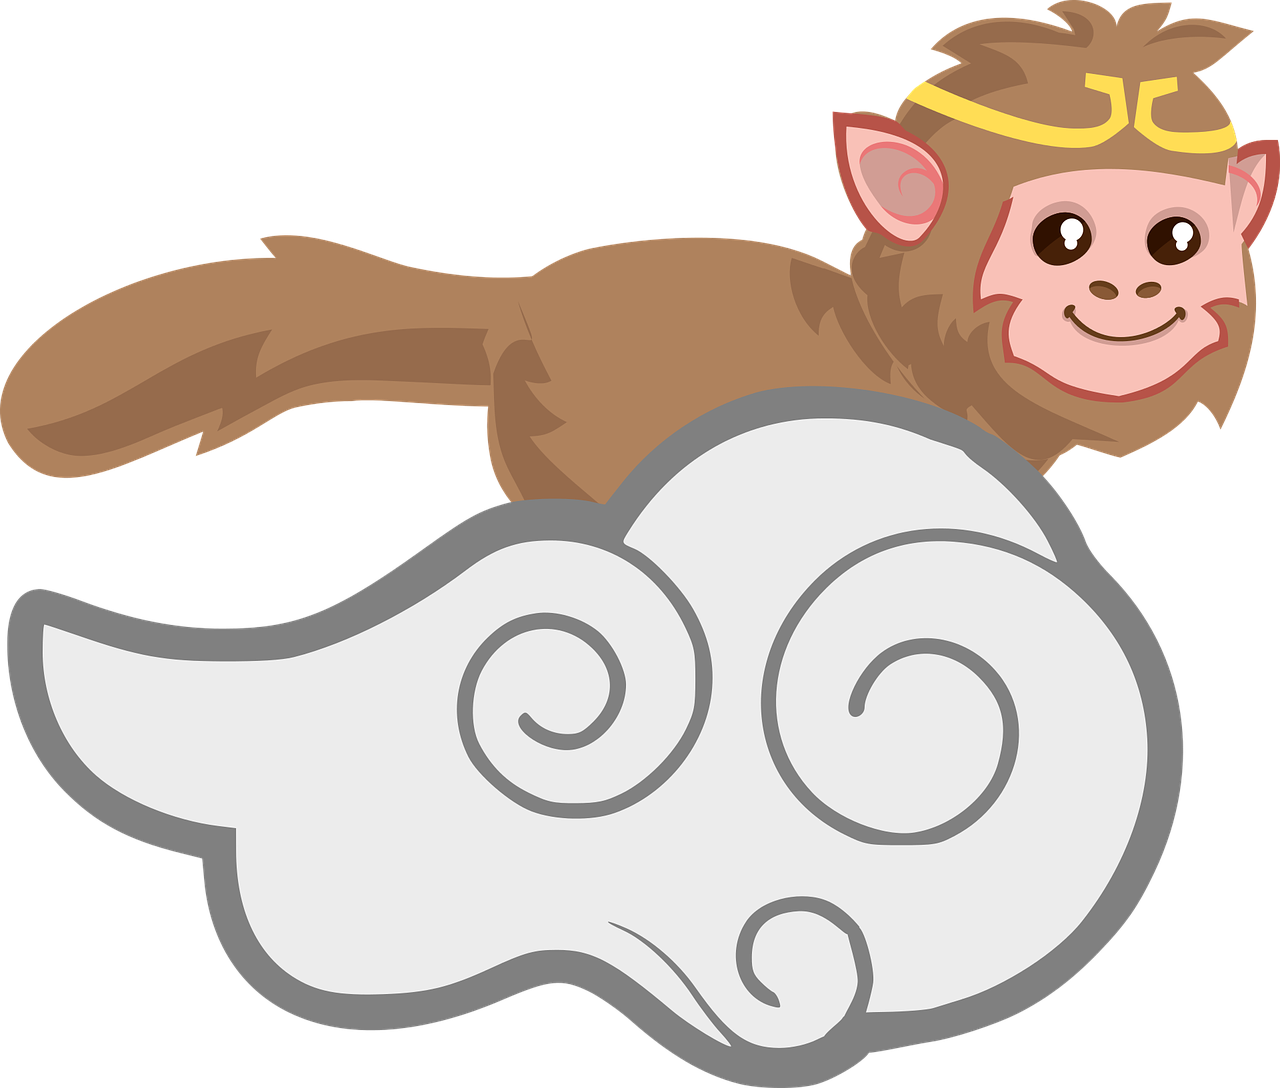 A Cartoon Monkey With A Crown And A Cloud